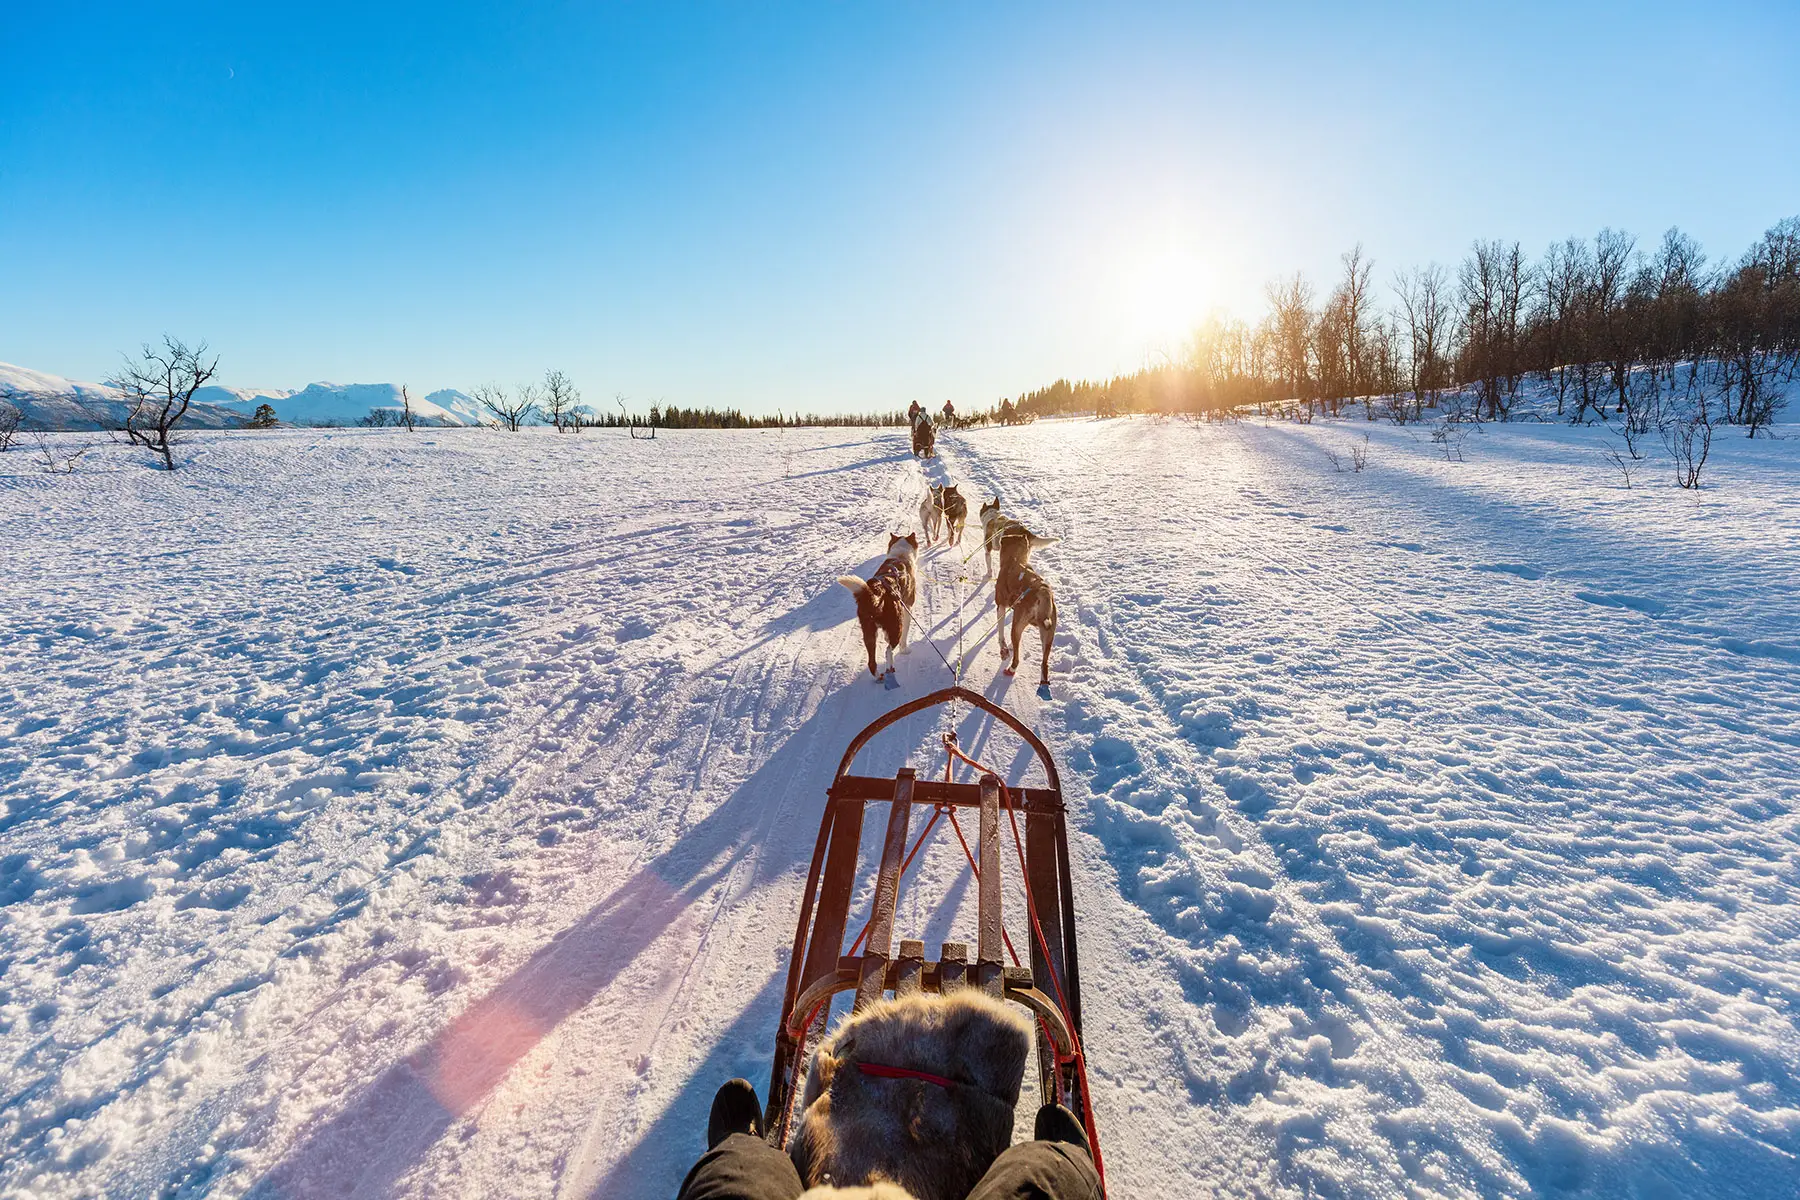 Sledding with husky dogs in Norway